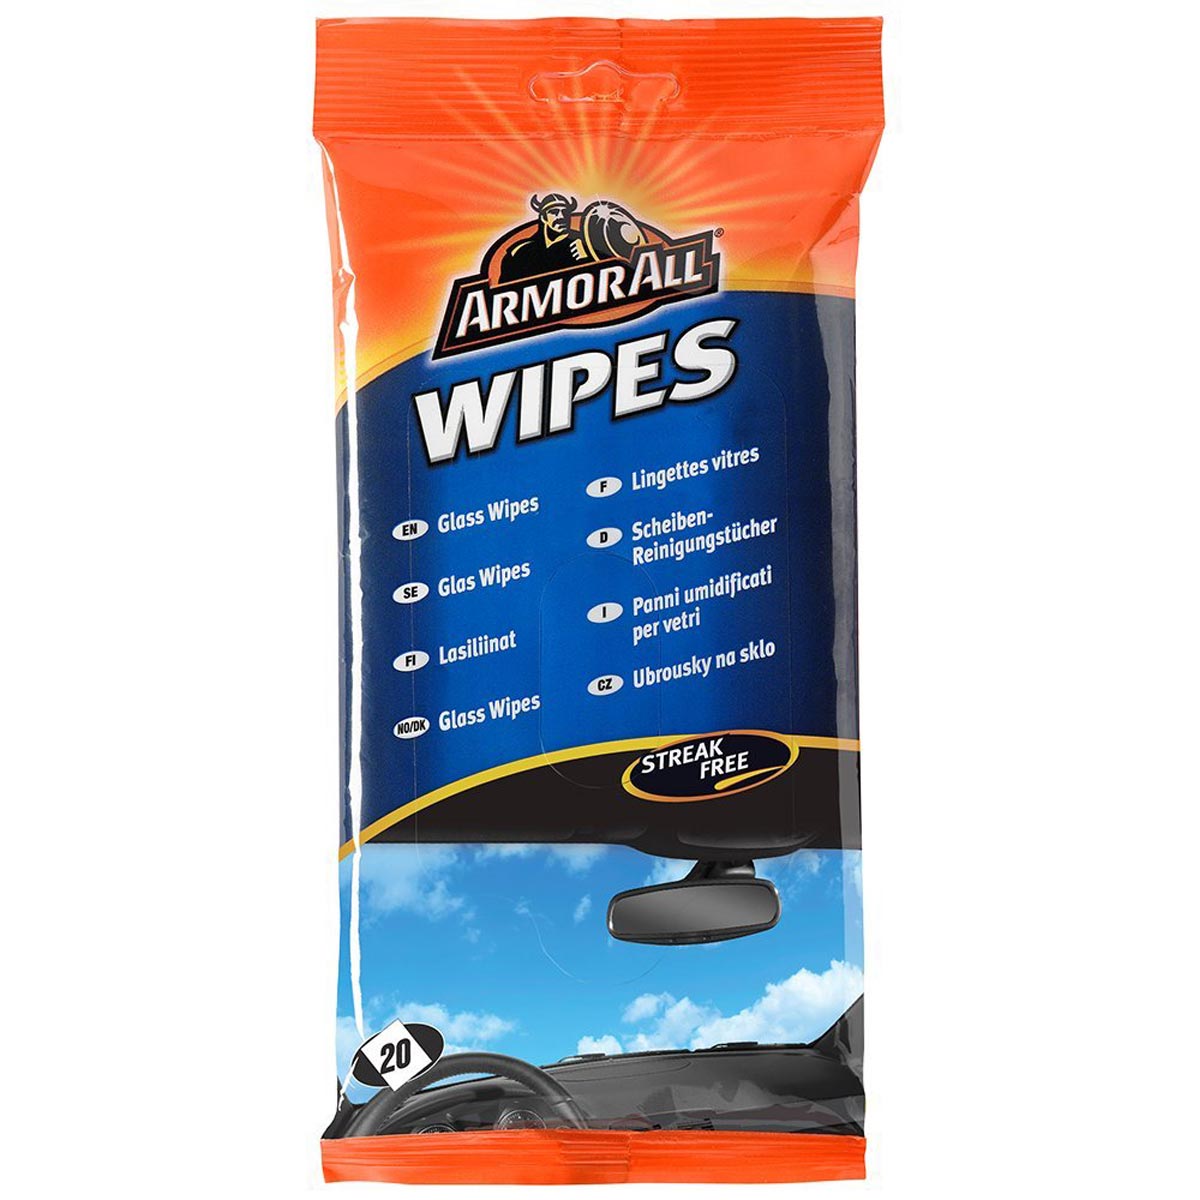 Armor All Glass Wipes - 20 Wipes Pack